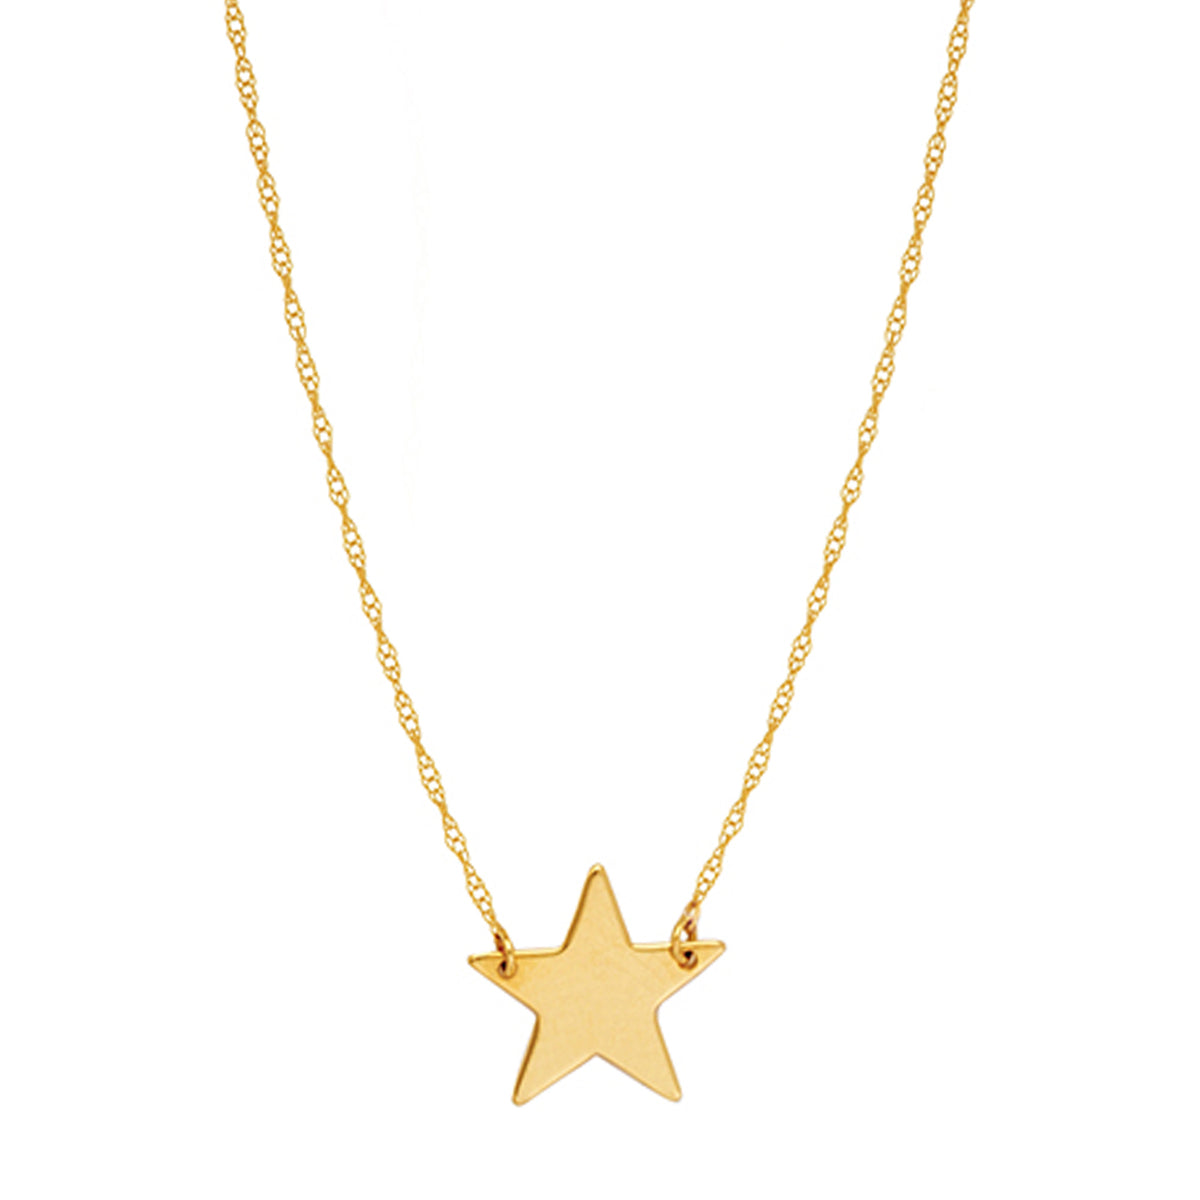 14K Yellow Gold Mini Star Pendant Necklace, 16" To 18" Adjustable